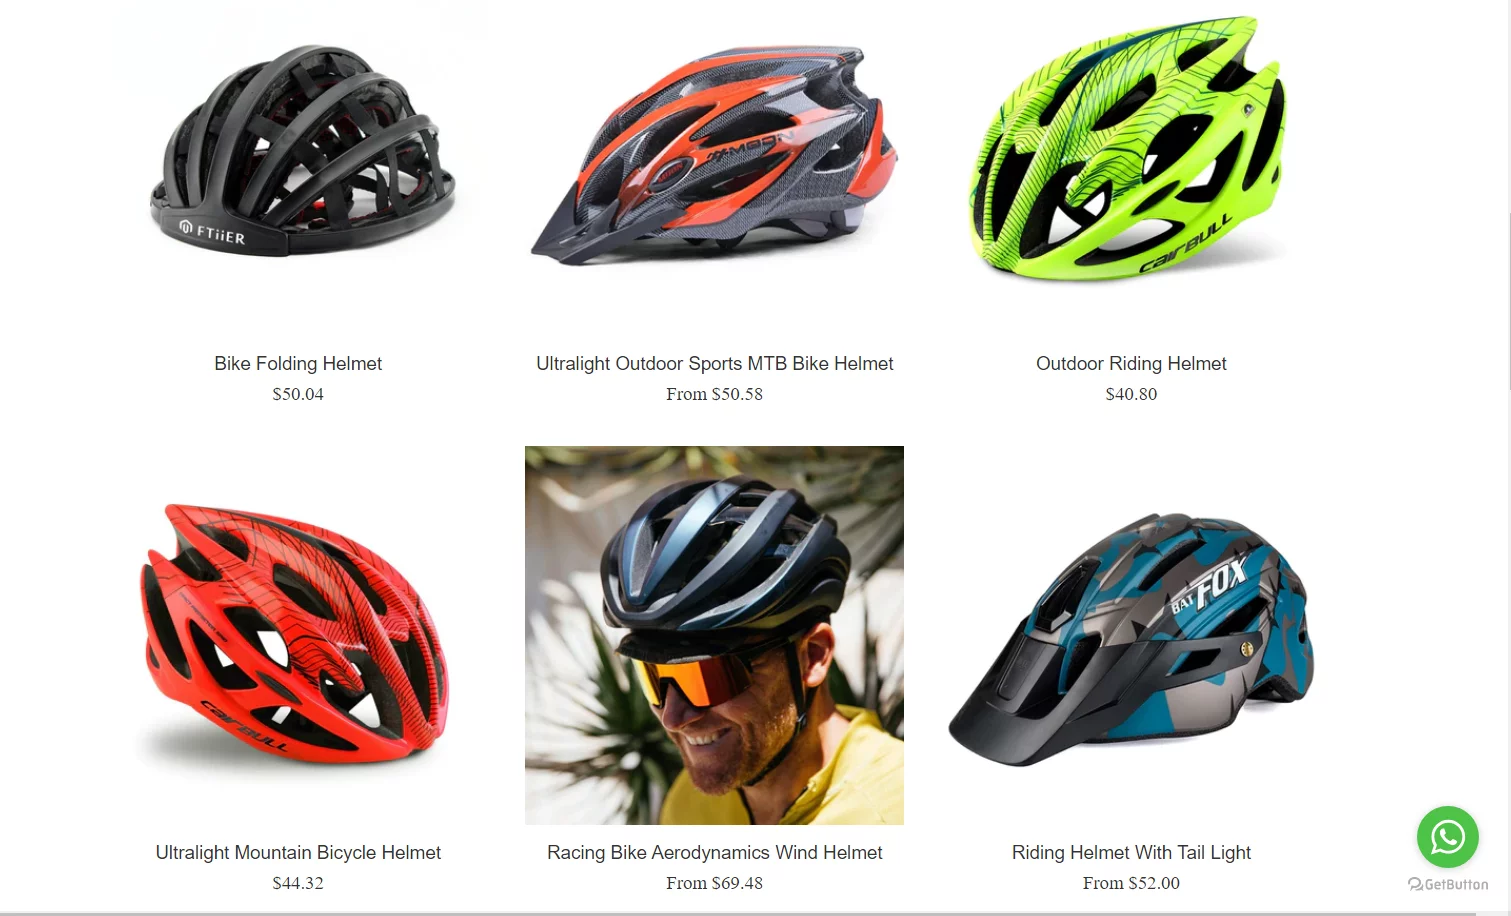 What are some winning products in the Bikers dropshipping business?